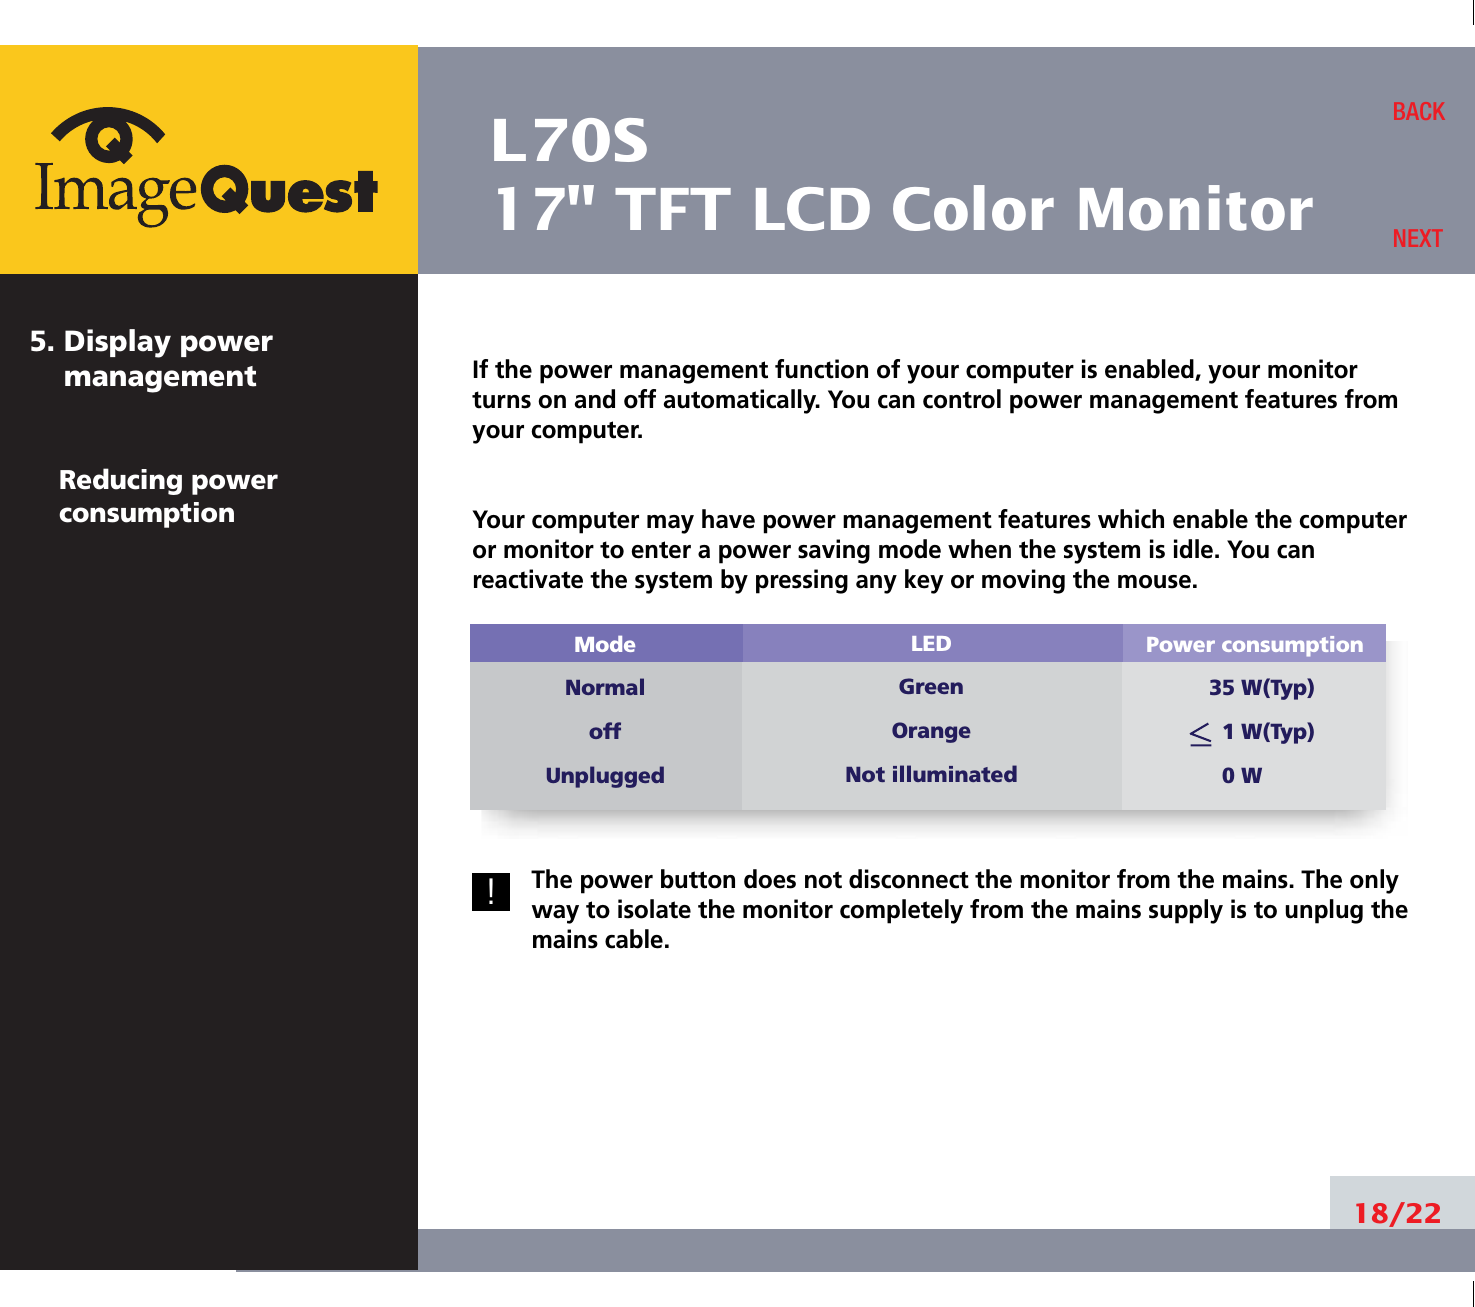 L70S17&quot; TFT LCD Color MonitorIf the power management function of your computer is enabled, your monitorturns on and off automatically. You can control power management features fromyour computer.Your computer may have power management features which enable the computeror monitor to enter a power saving mode when the system is idle. You canreactivate the system by pressing any key or moving the mouse.The power button does not disconnect the monitor from the mains. The onlyway to isolate the monitor completely from the mains supply is to unplug themains cable.18/22BACKNEXT5. Display power managementReducing powerconsumptionPower consumption35 W(Typ)1 W(Typ)0 WModeNormaloffUnpluggedLEDGreenOrangeNot illuminated!